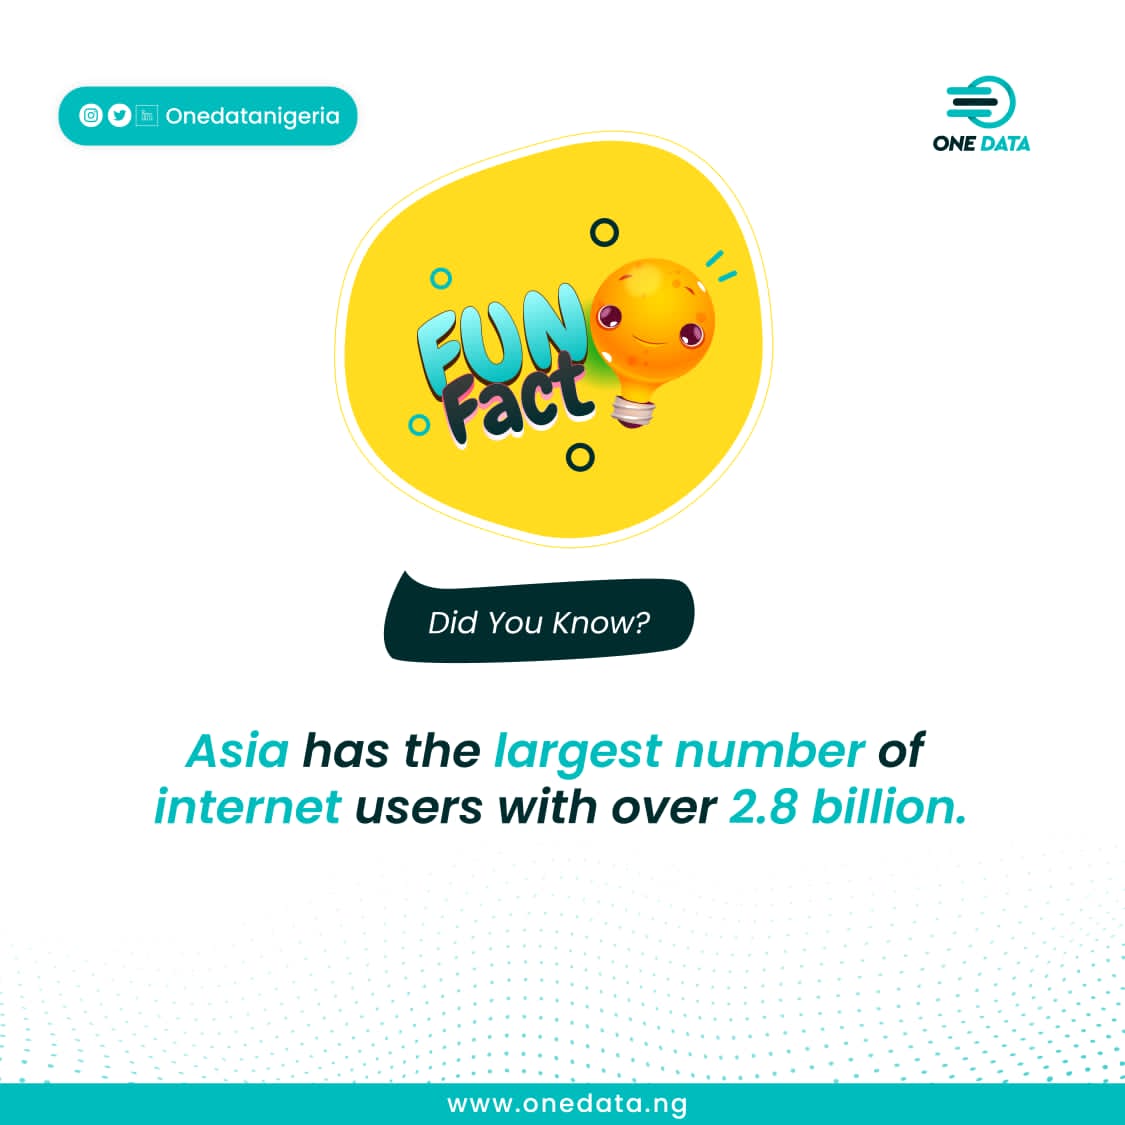 RT @UgochuckwuP: RT @onedatanigeria: Fun fact
Asia has the largest number of internet users with over 2.8 billion.

#onedata #onedatanigeria 
#lte #cctv #wisp #connectivity #technicianlife #security #fiber #cloud #telecoms #cybersecurity #smartcity #inte…